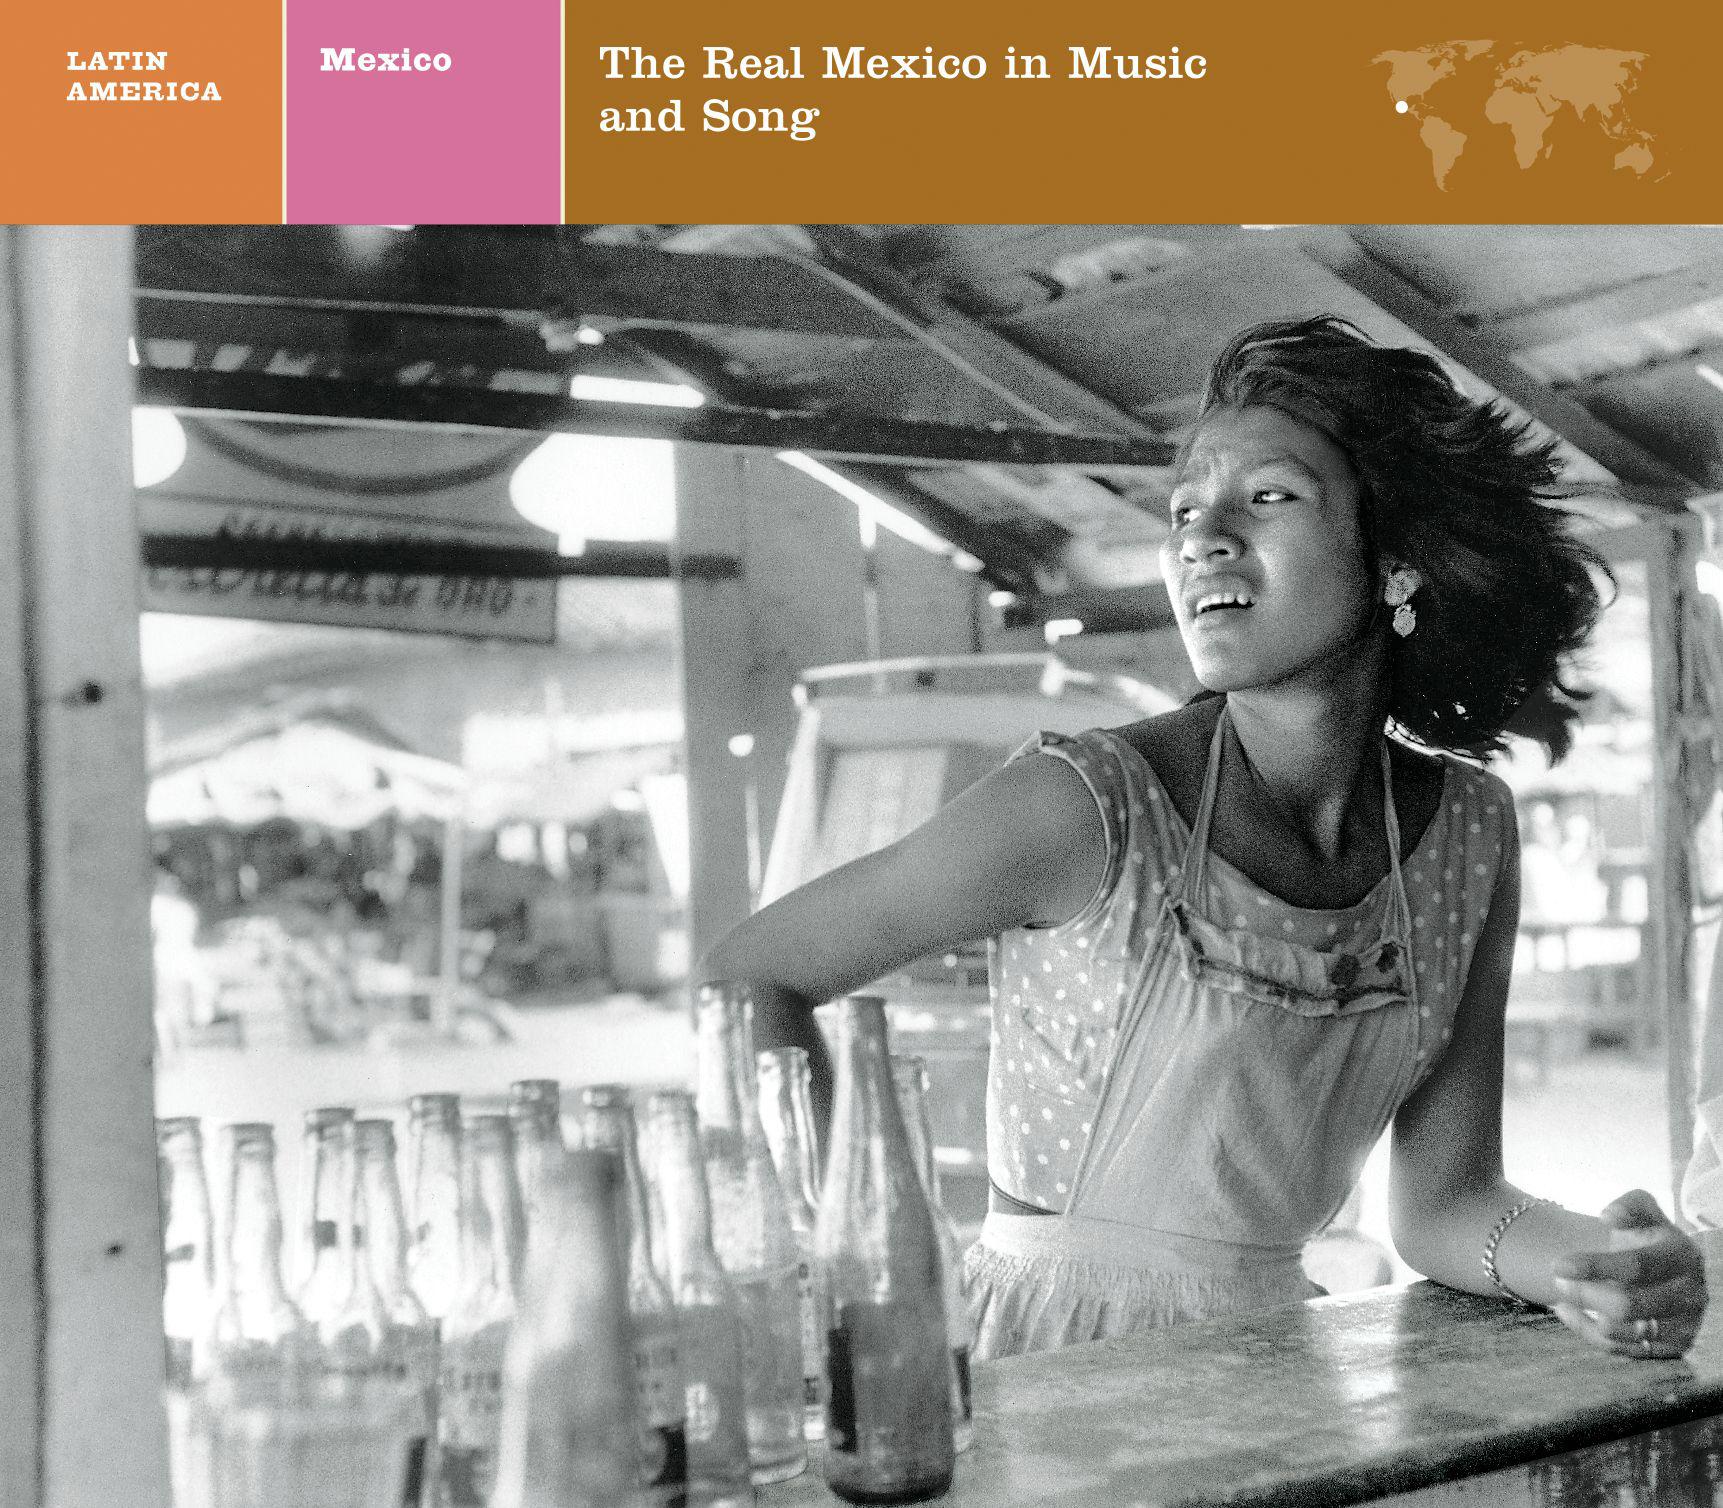 EXPLORER SERIES/MEXICO: THE REAL MEXICO IN MUSIC AND SONG